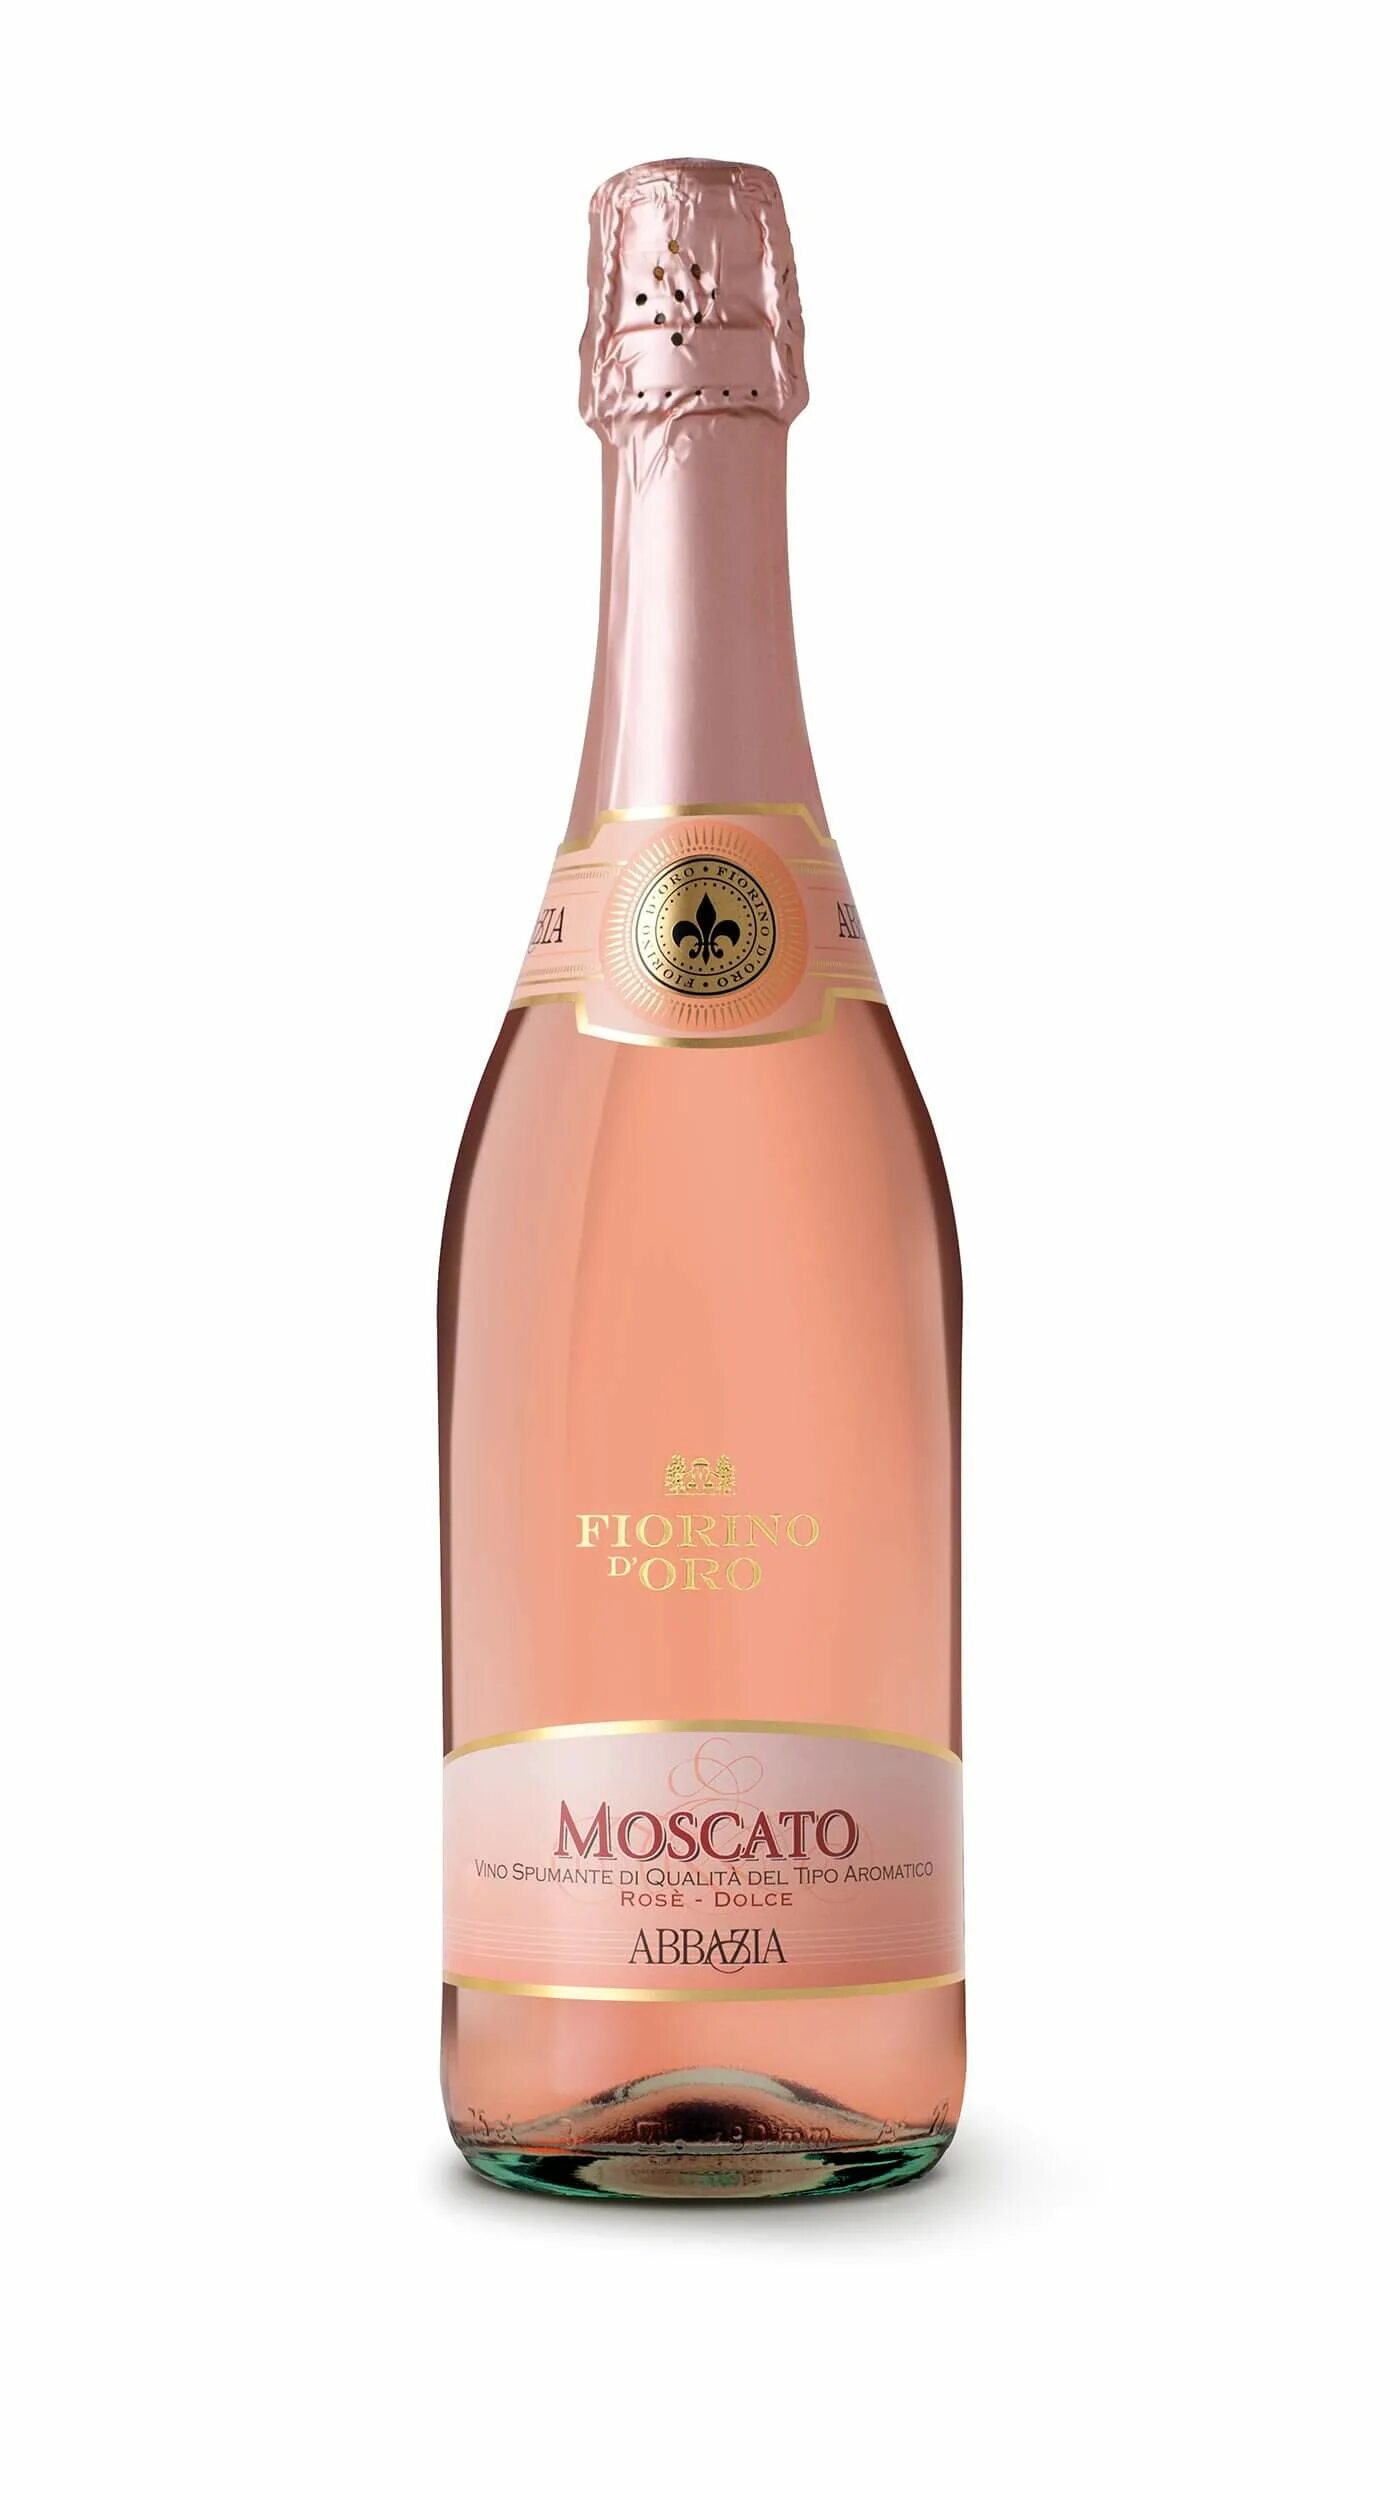 Вино Moscato Rose Dolce. Аббация Москато. Moscato Rose Dolce 0,75. Moscato шампанское Rose Dolce. Moscato dolce